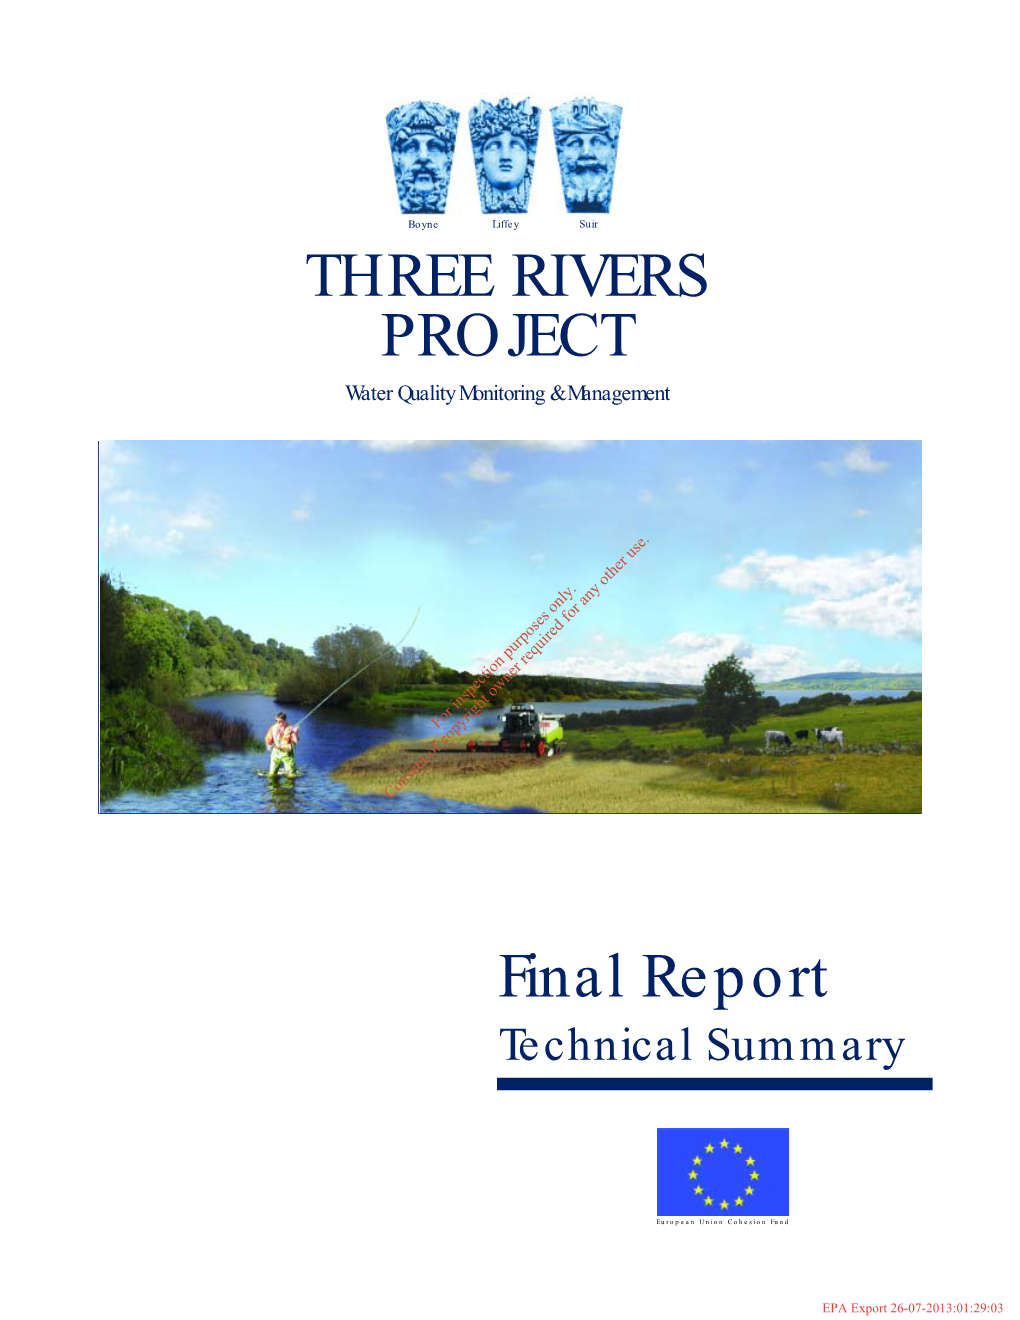 THREE RIVERS PROJECT Final Report